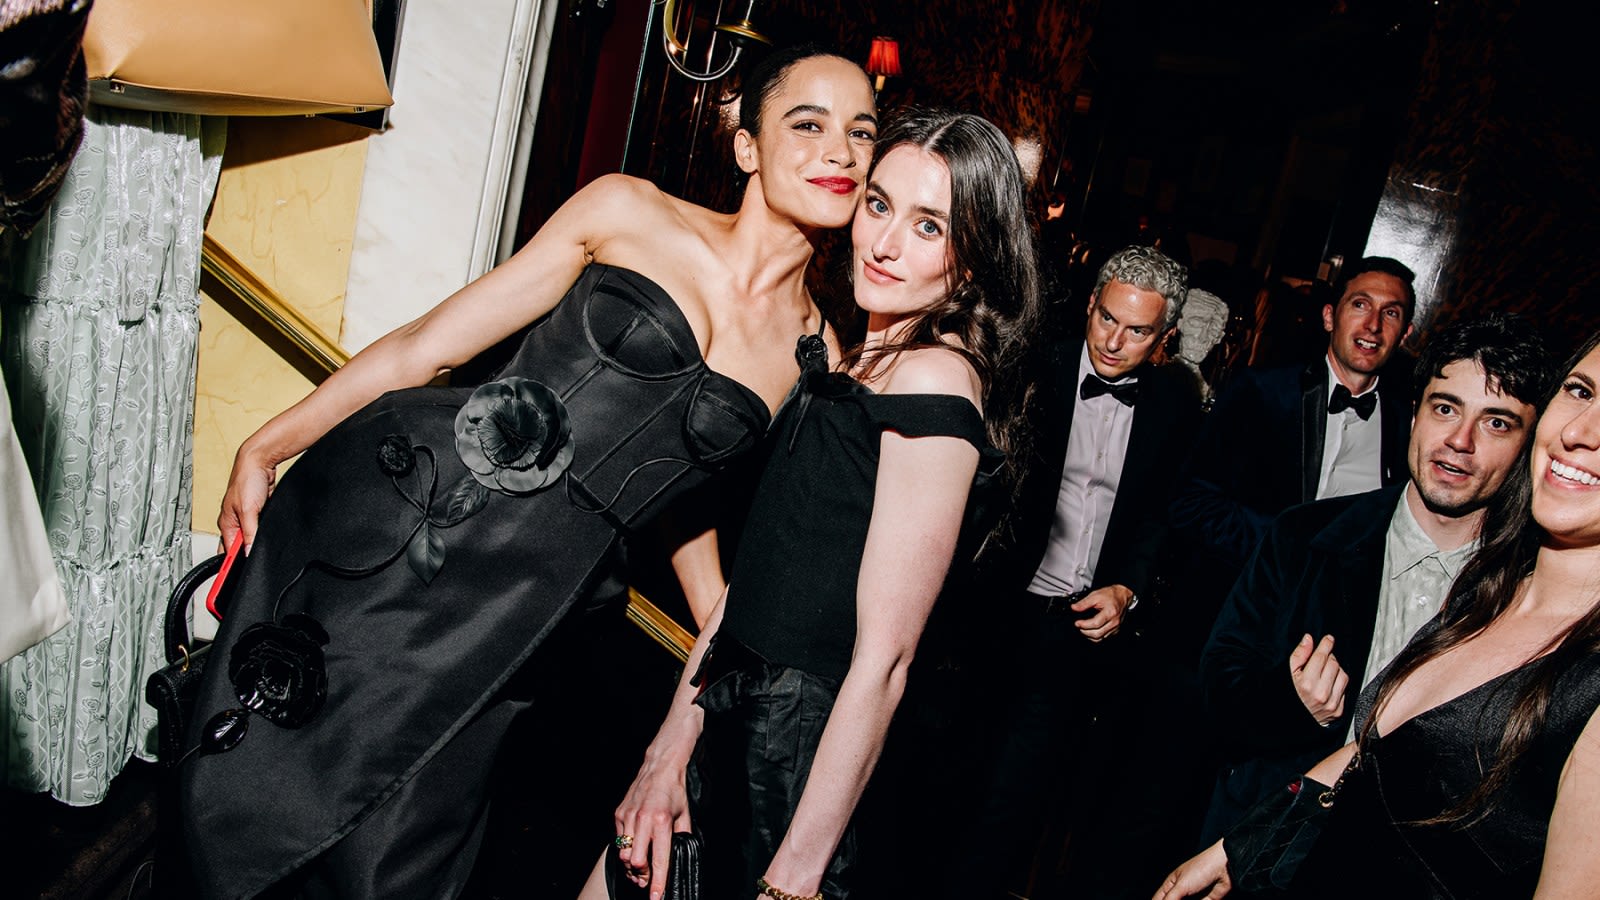 We Partied With the 'Stereophonic' Team After Their Triumphant, 'Terrifying' Tony Awards Night